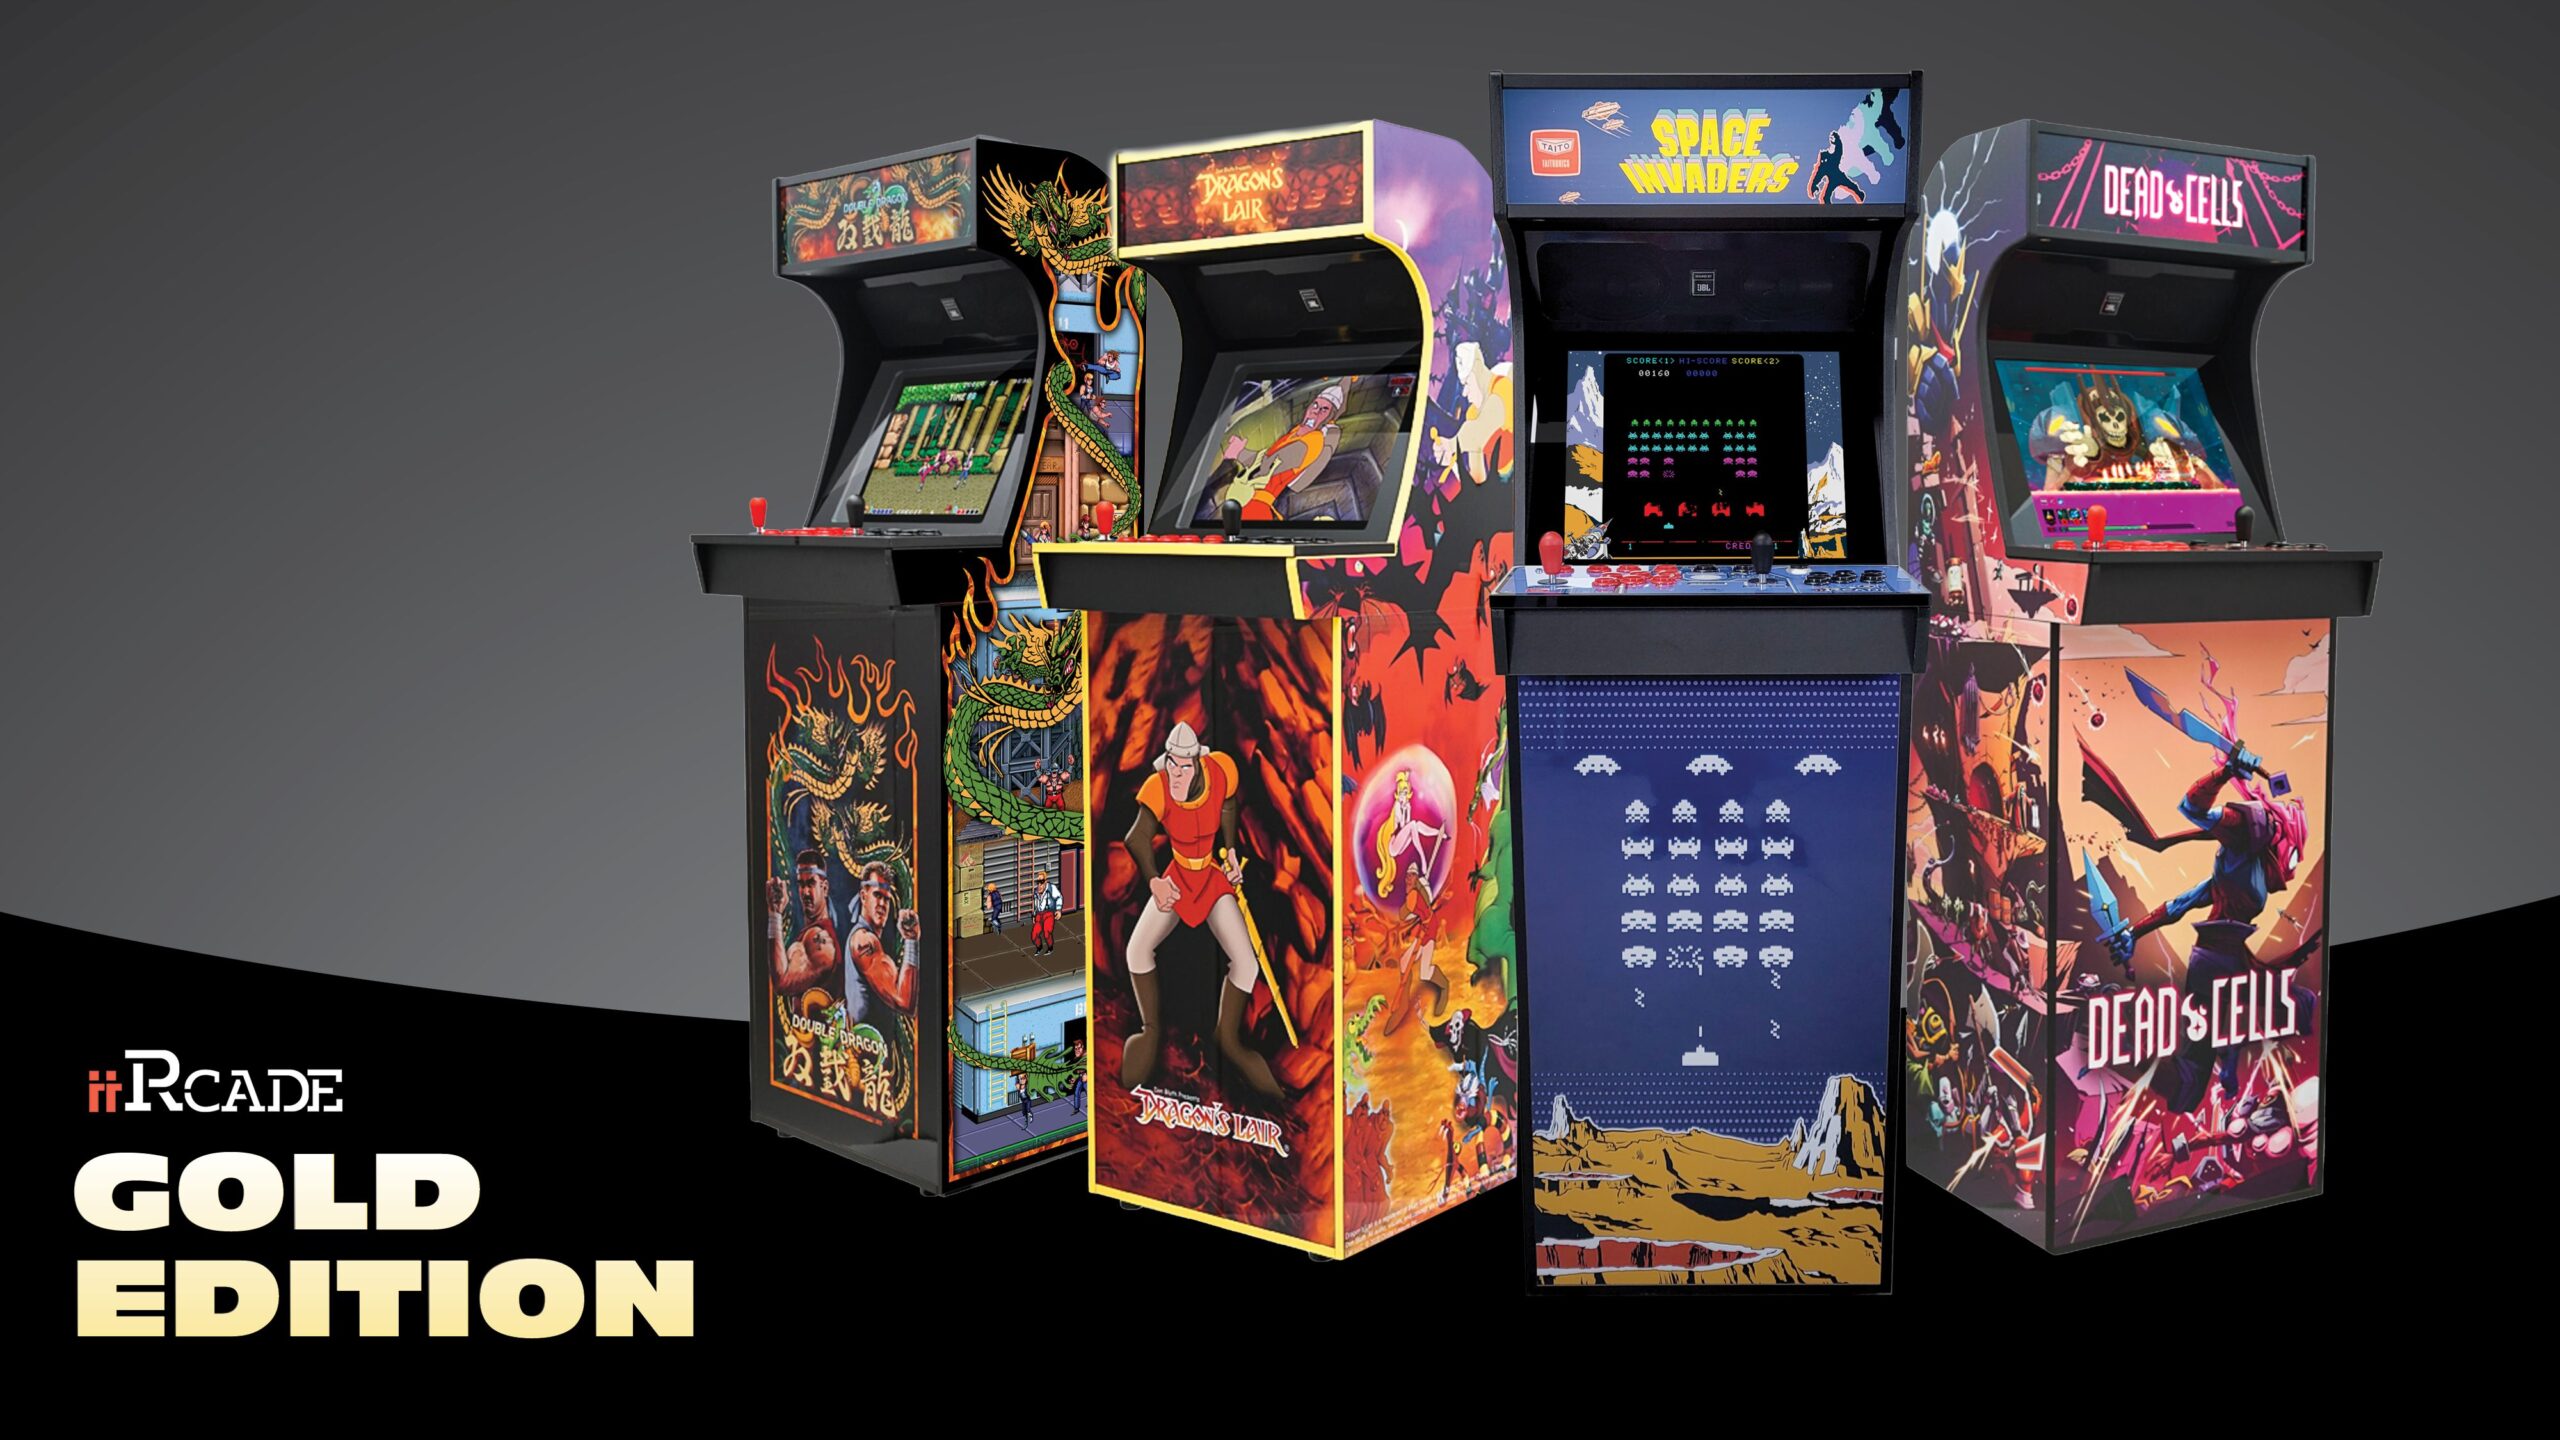 iiRcade Gold Edition, Featuring ‘Sound by JBL’ and a New Cabinet Design, Now Available for Pre-Order